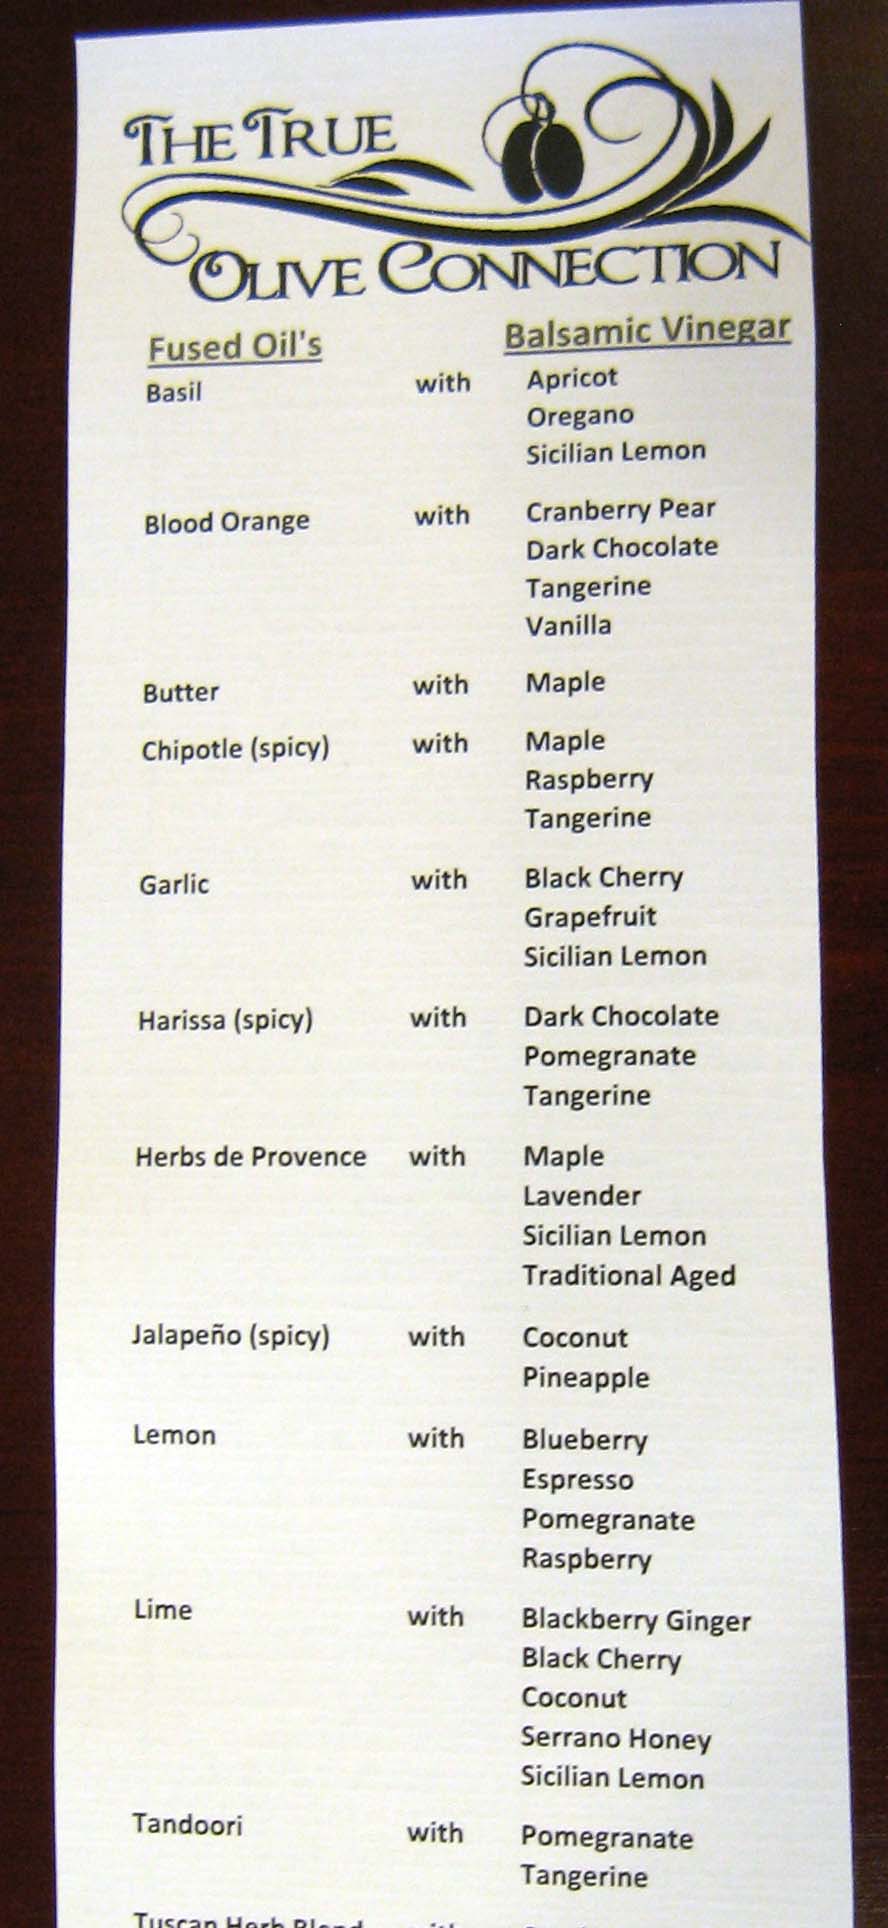 Suggested combinations for dipping bread